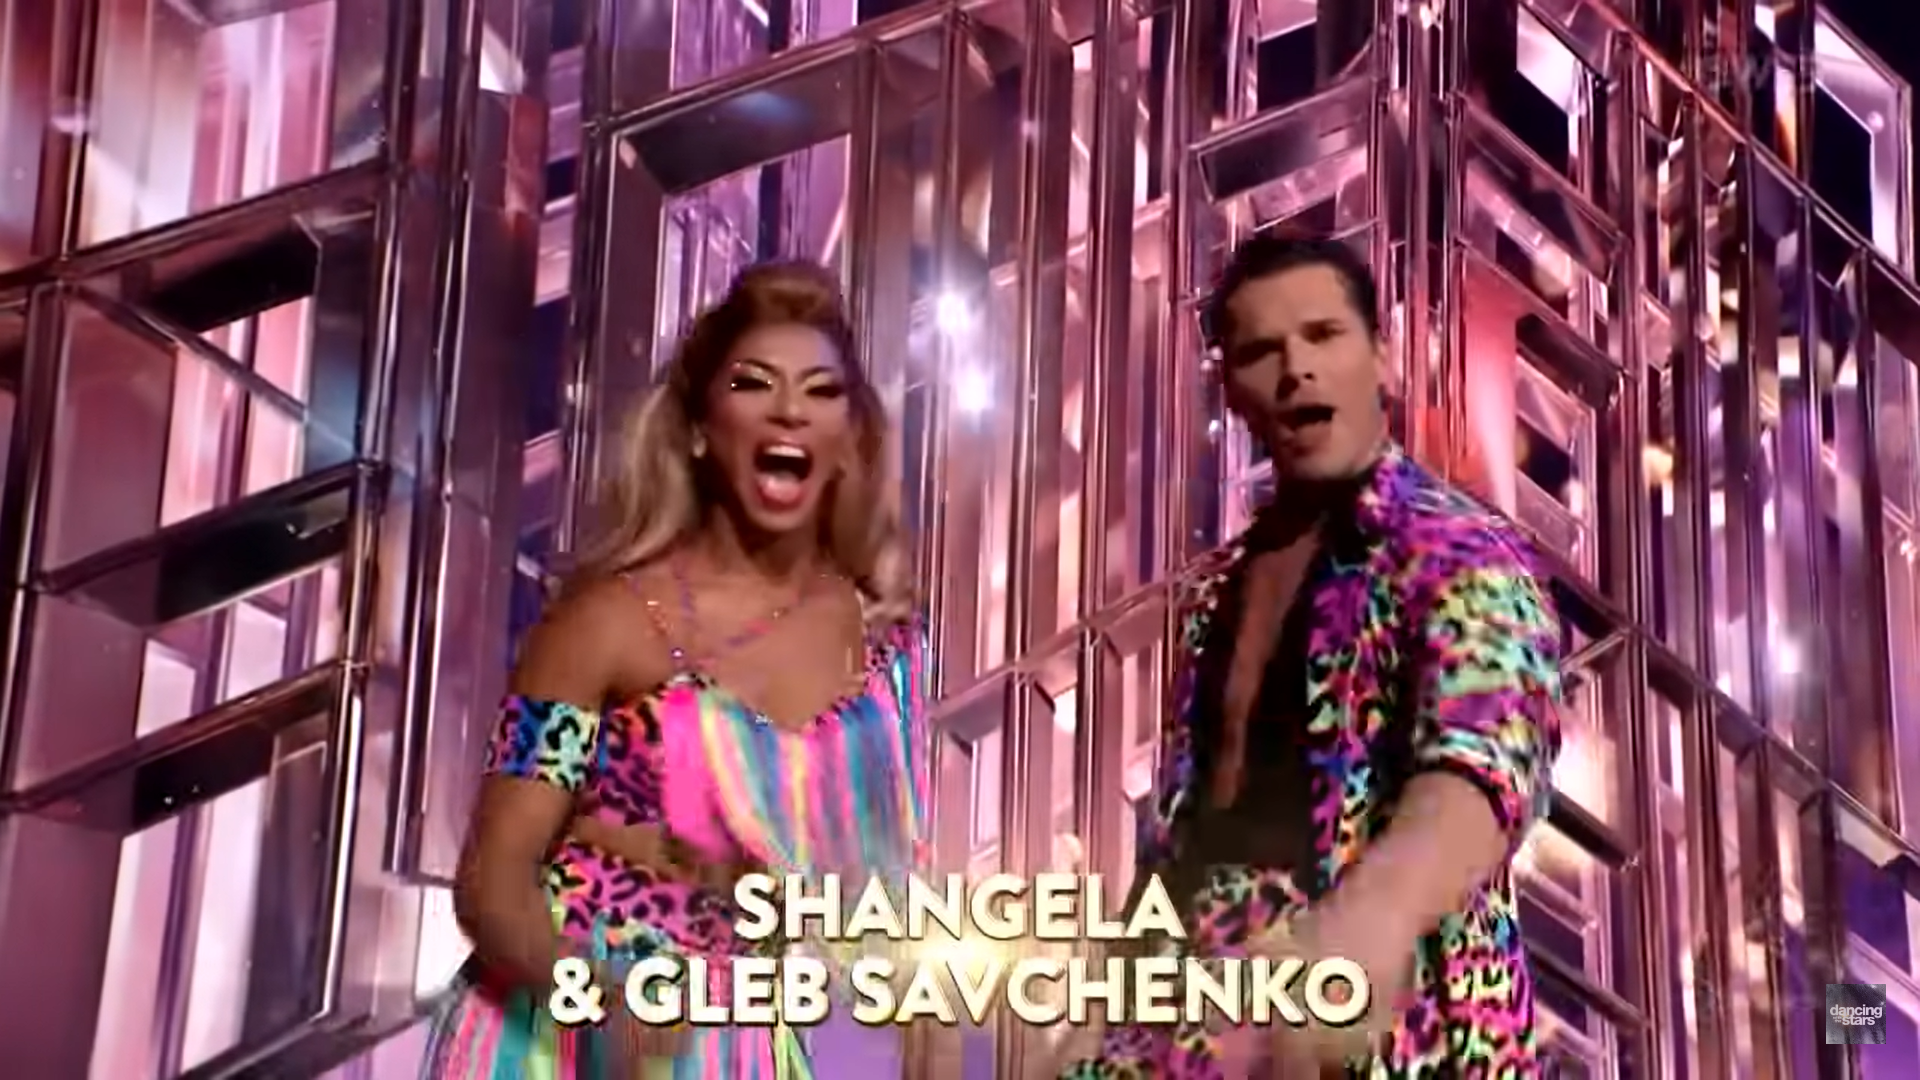 Drag performer Shangela makes 'Dancing With the Stars' history